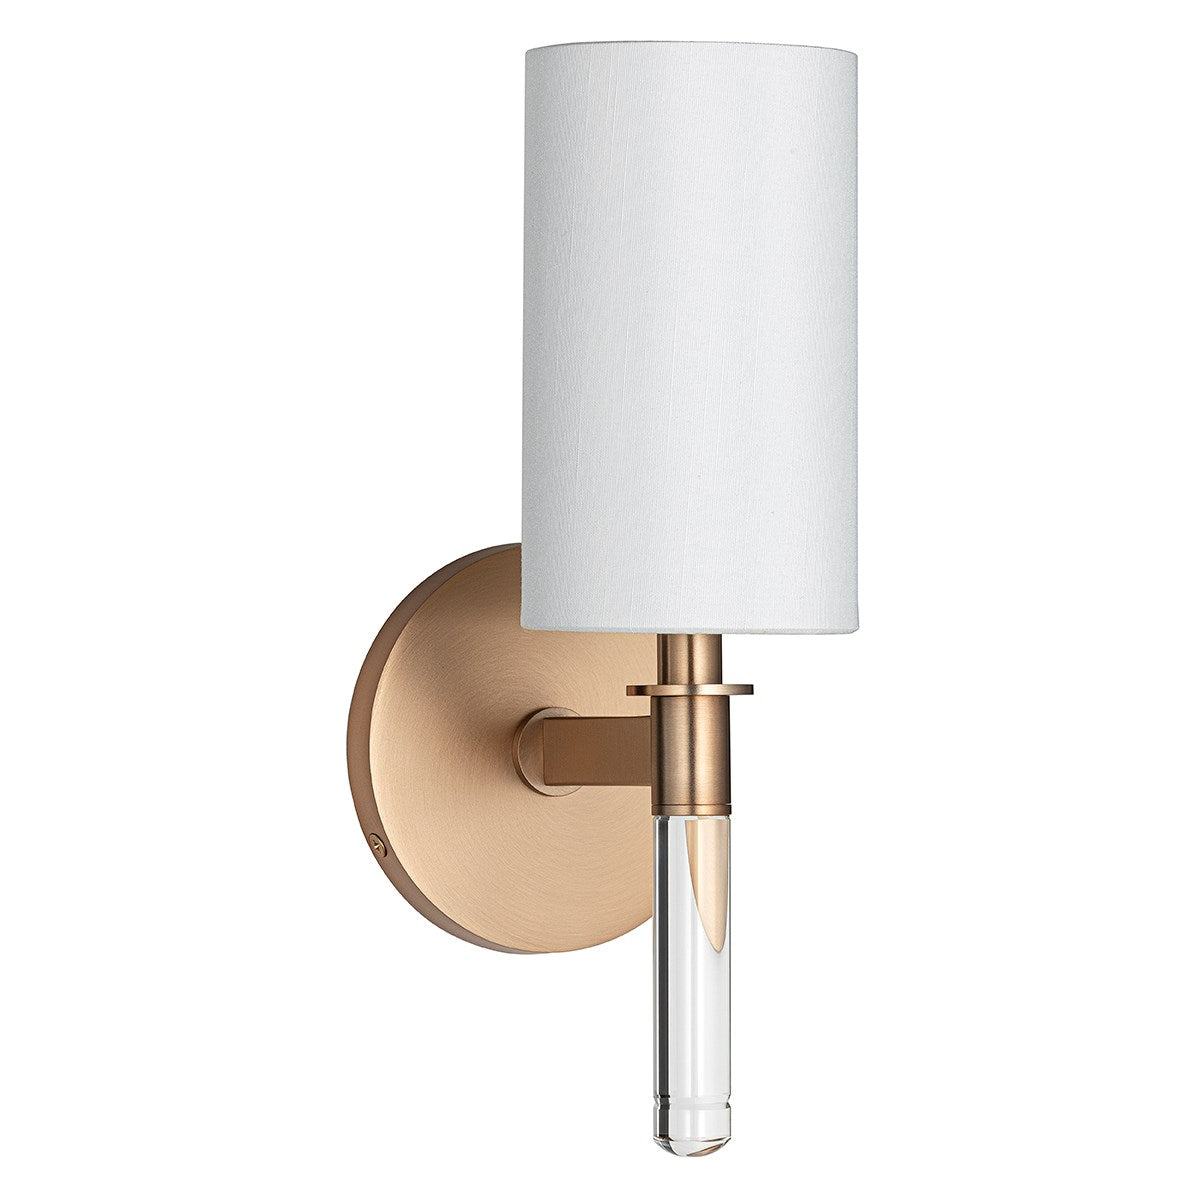 Wylie - 1 LIGHT WALL SCONCE